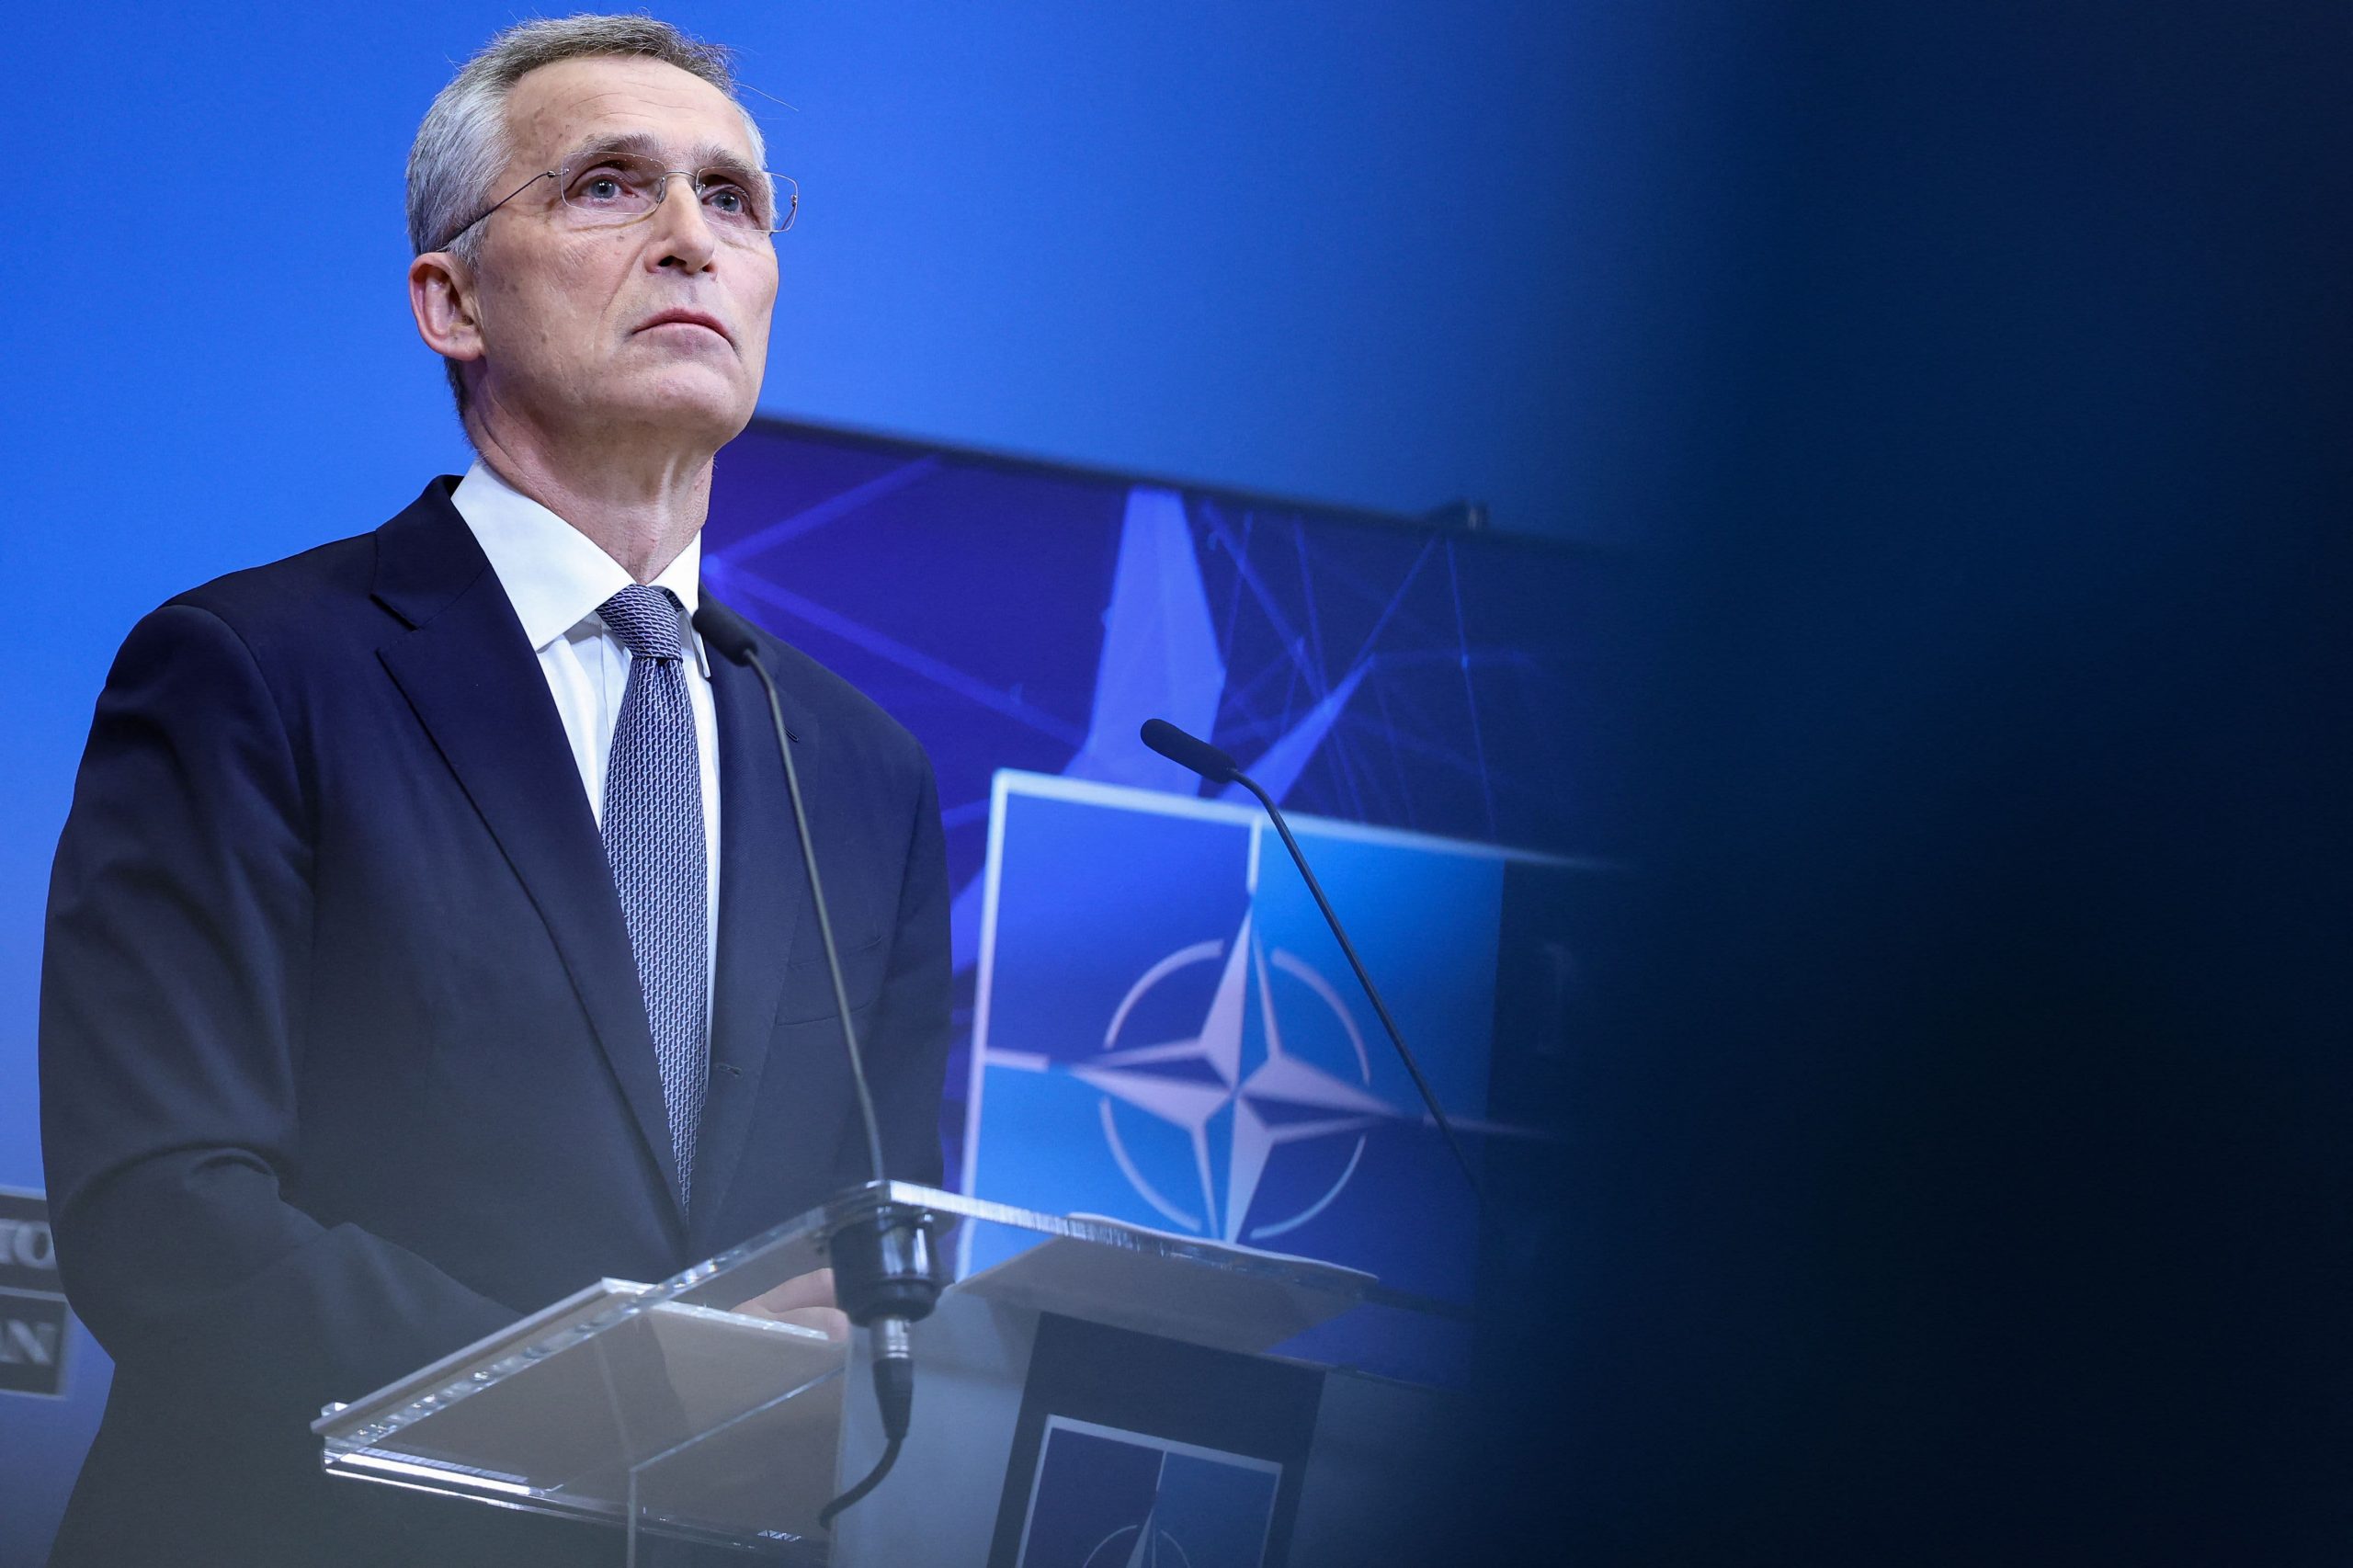 NATO chief to Putin ‘stop this war immediately,’ calls for diplomacy